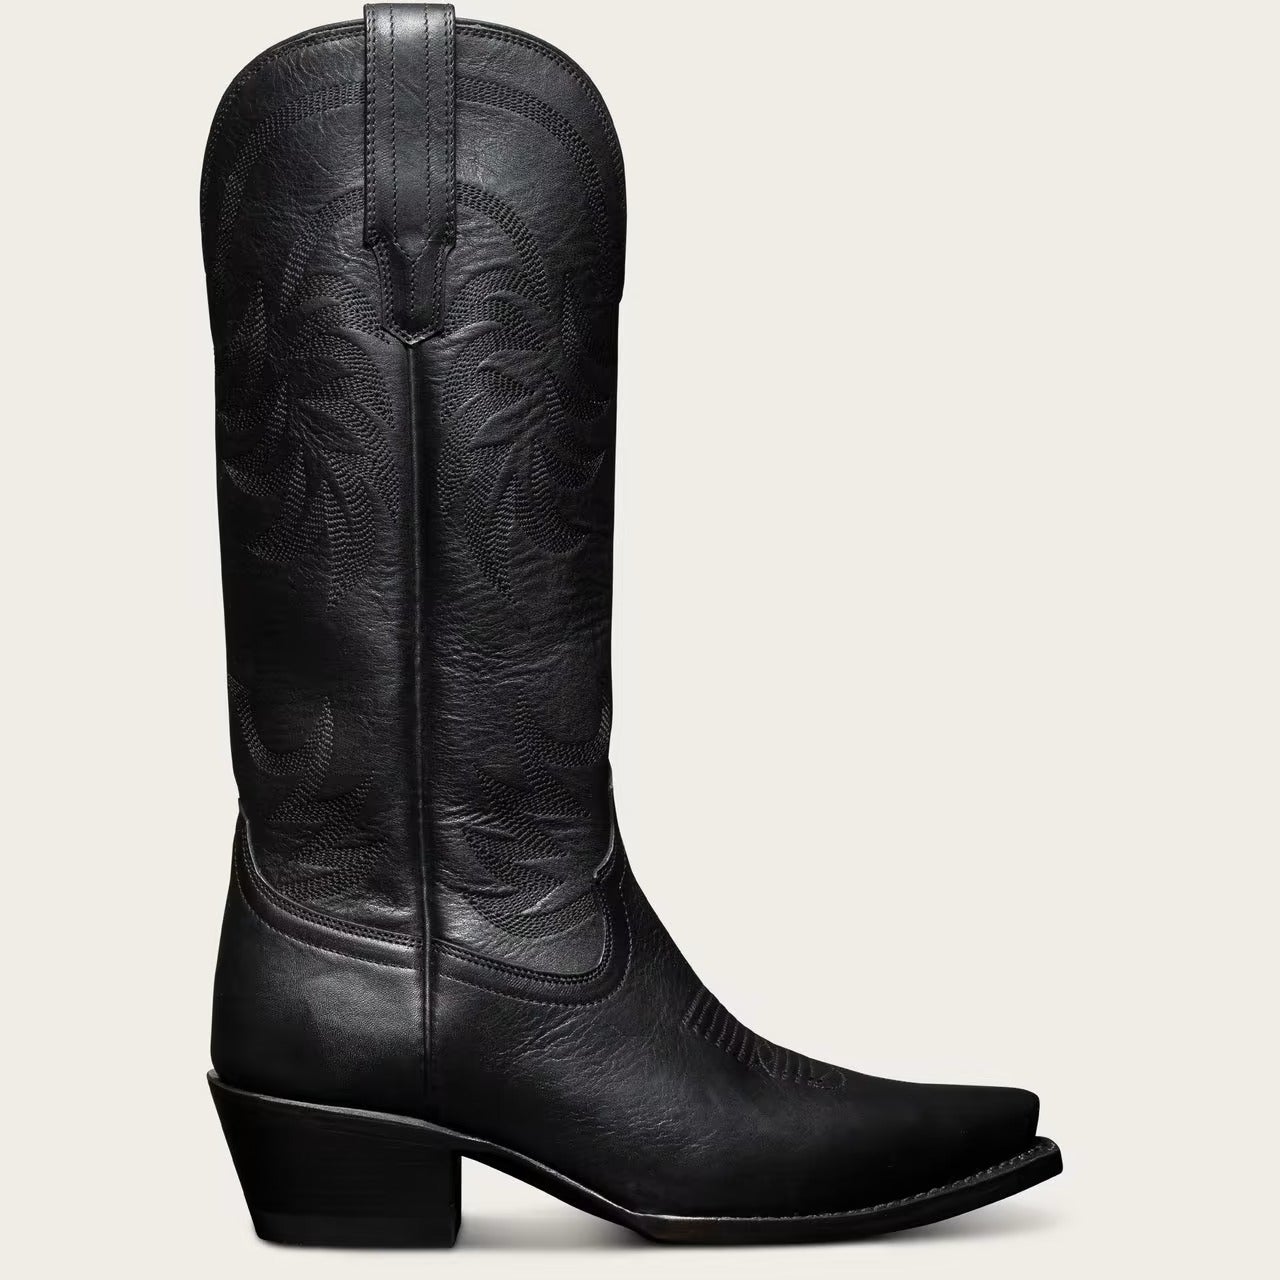 Mid-calf boots in black